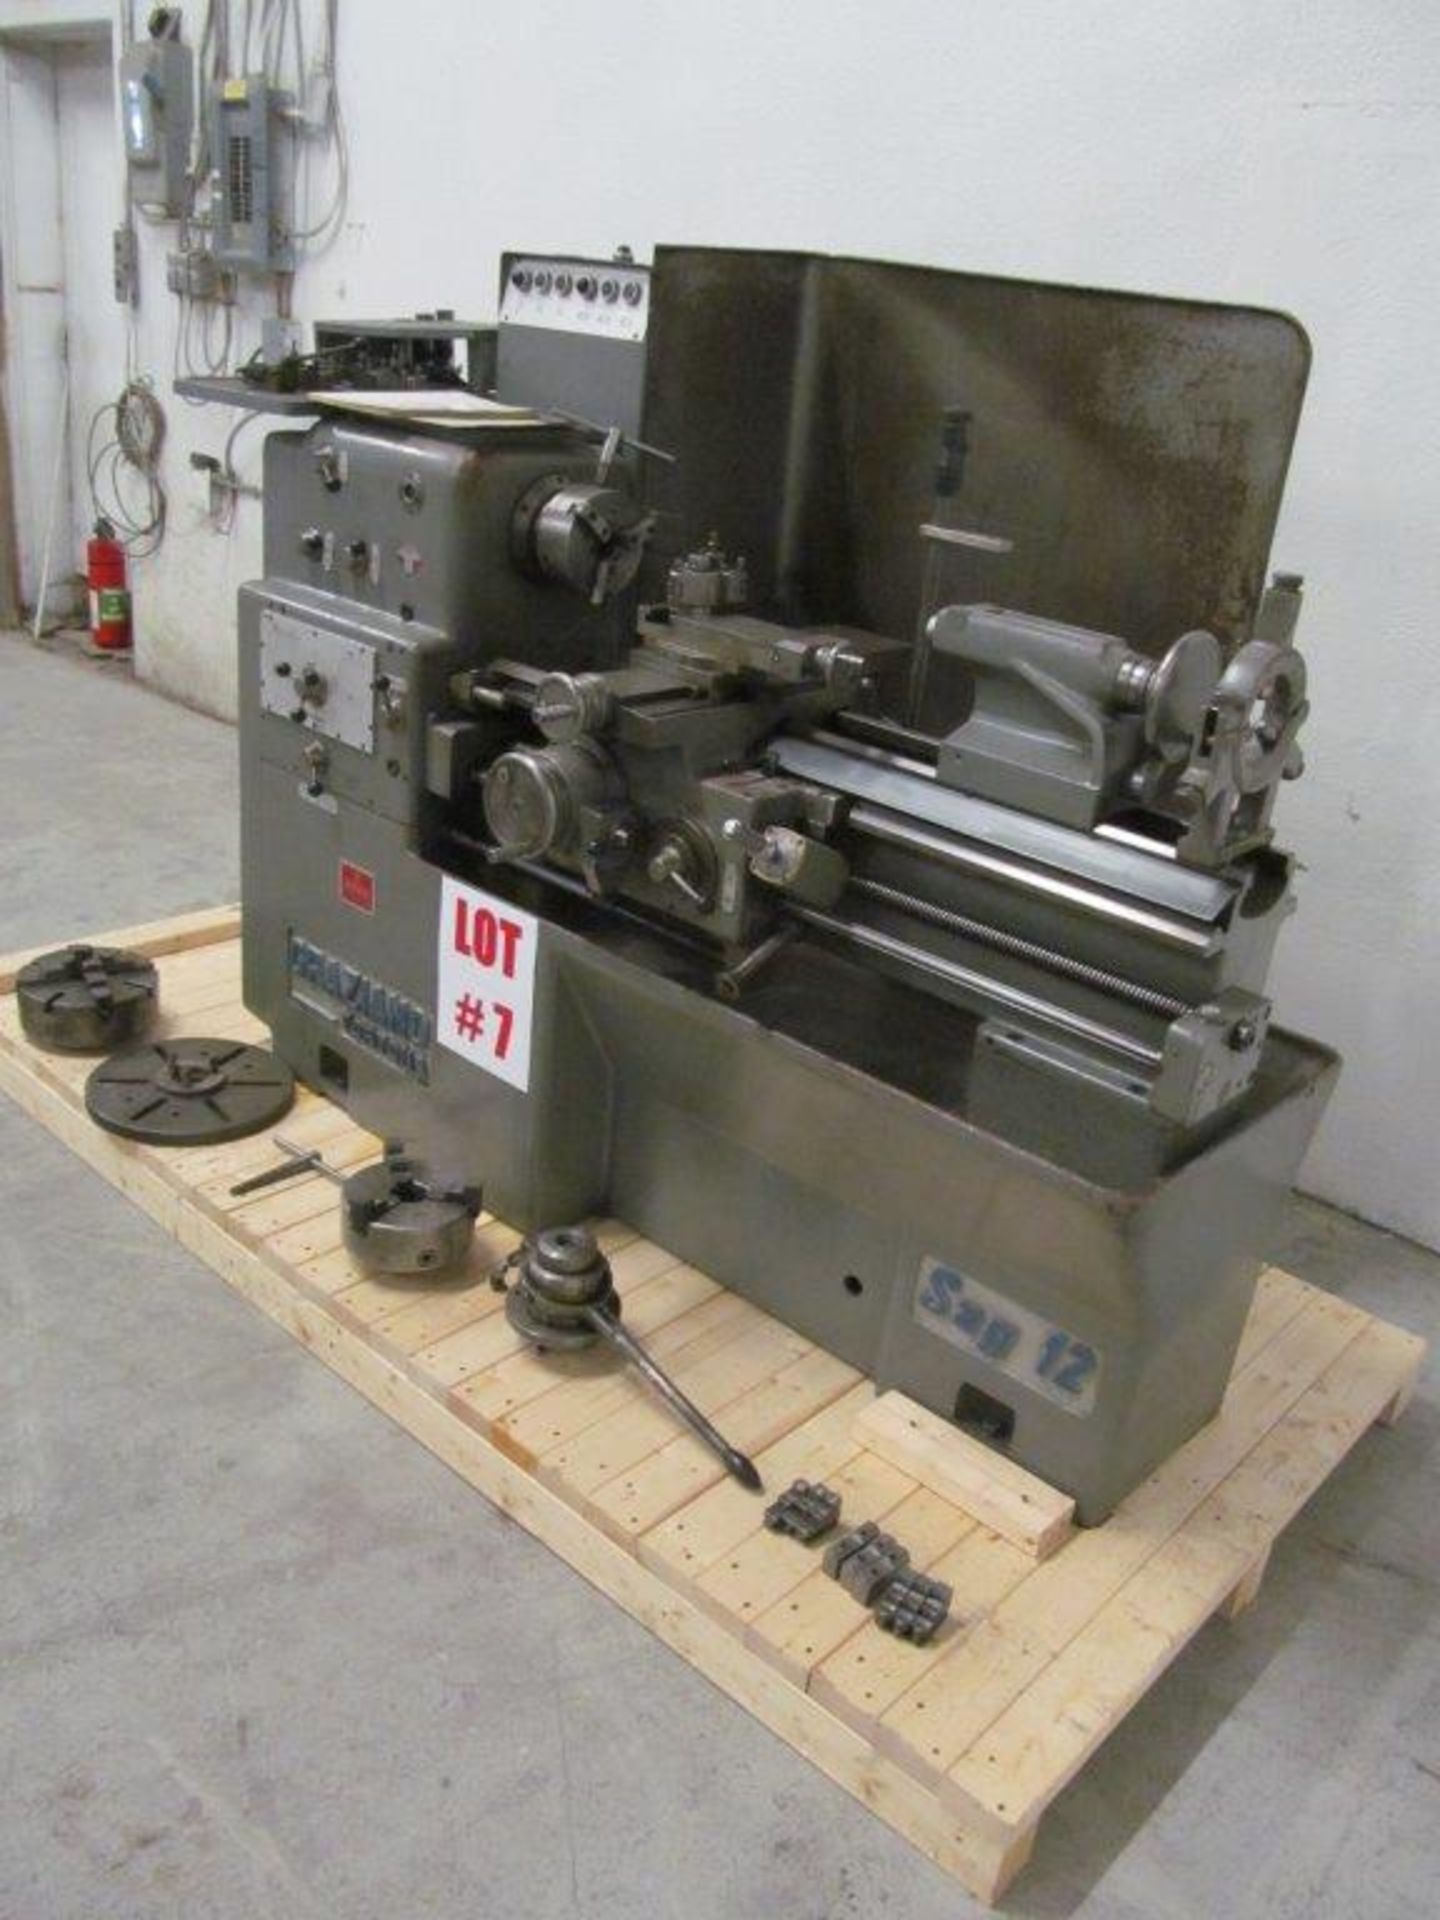 GRAZIANO ENGINE LATHE MODEL SAG 12, 14-1/2" SWING X 30" CENTERS, C/W ACCOMPANYING ACCESSORIES, - Image 3 of 8